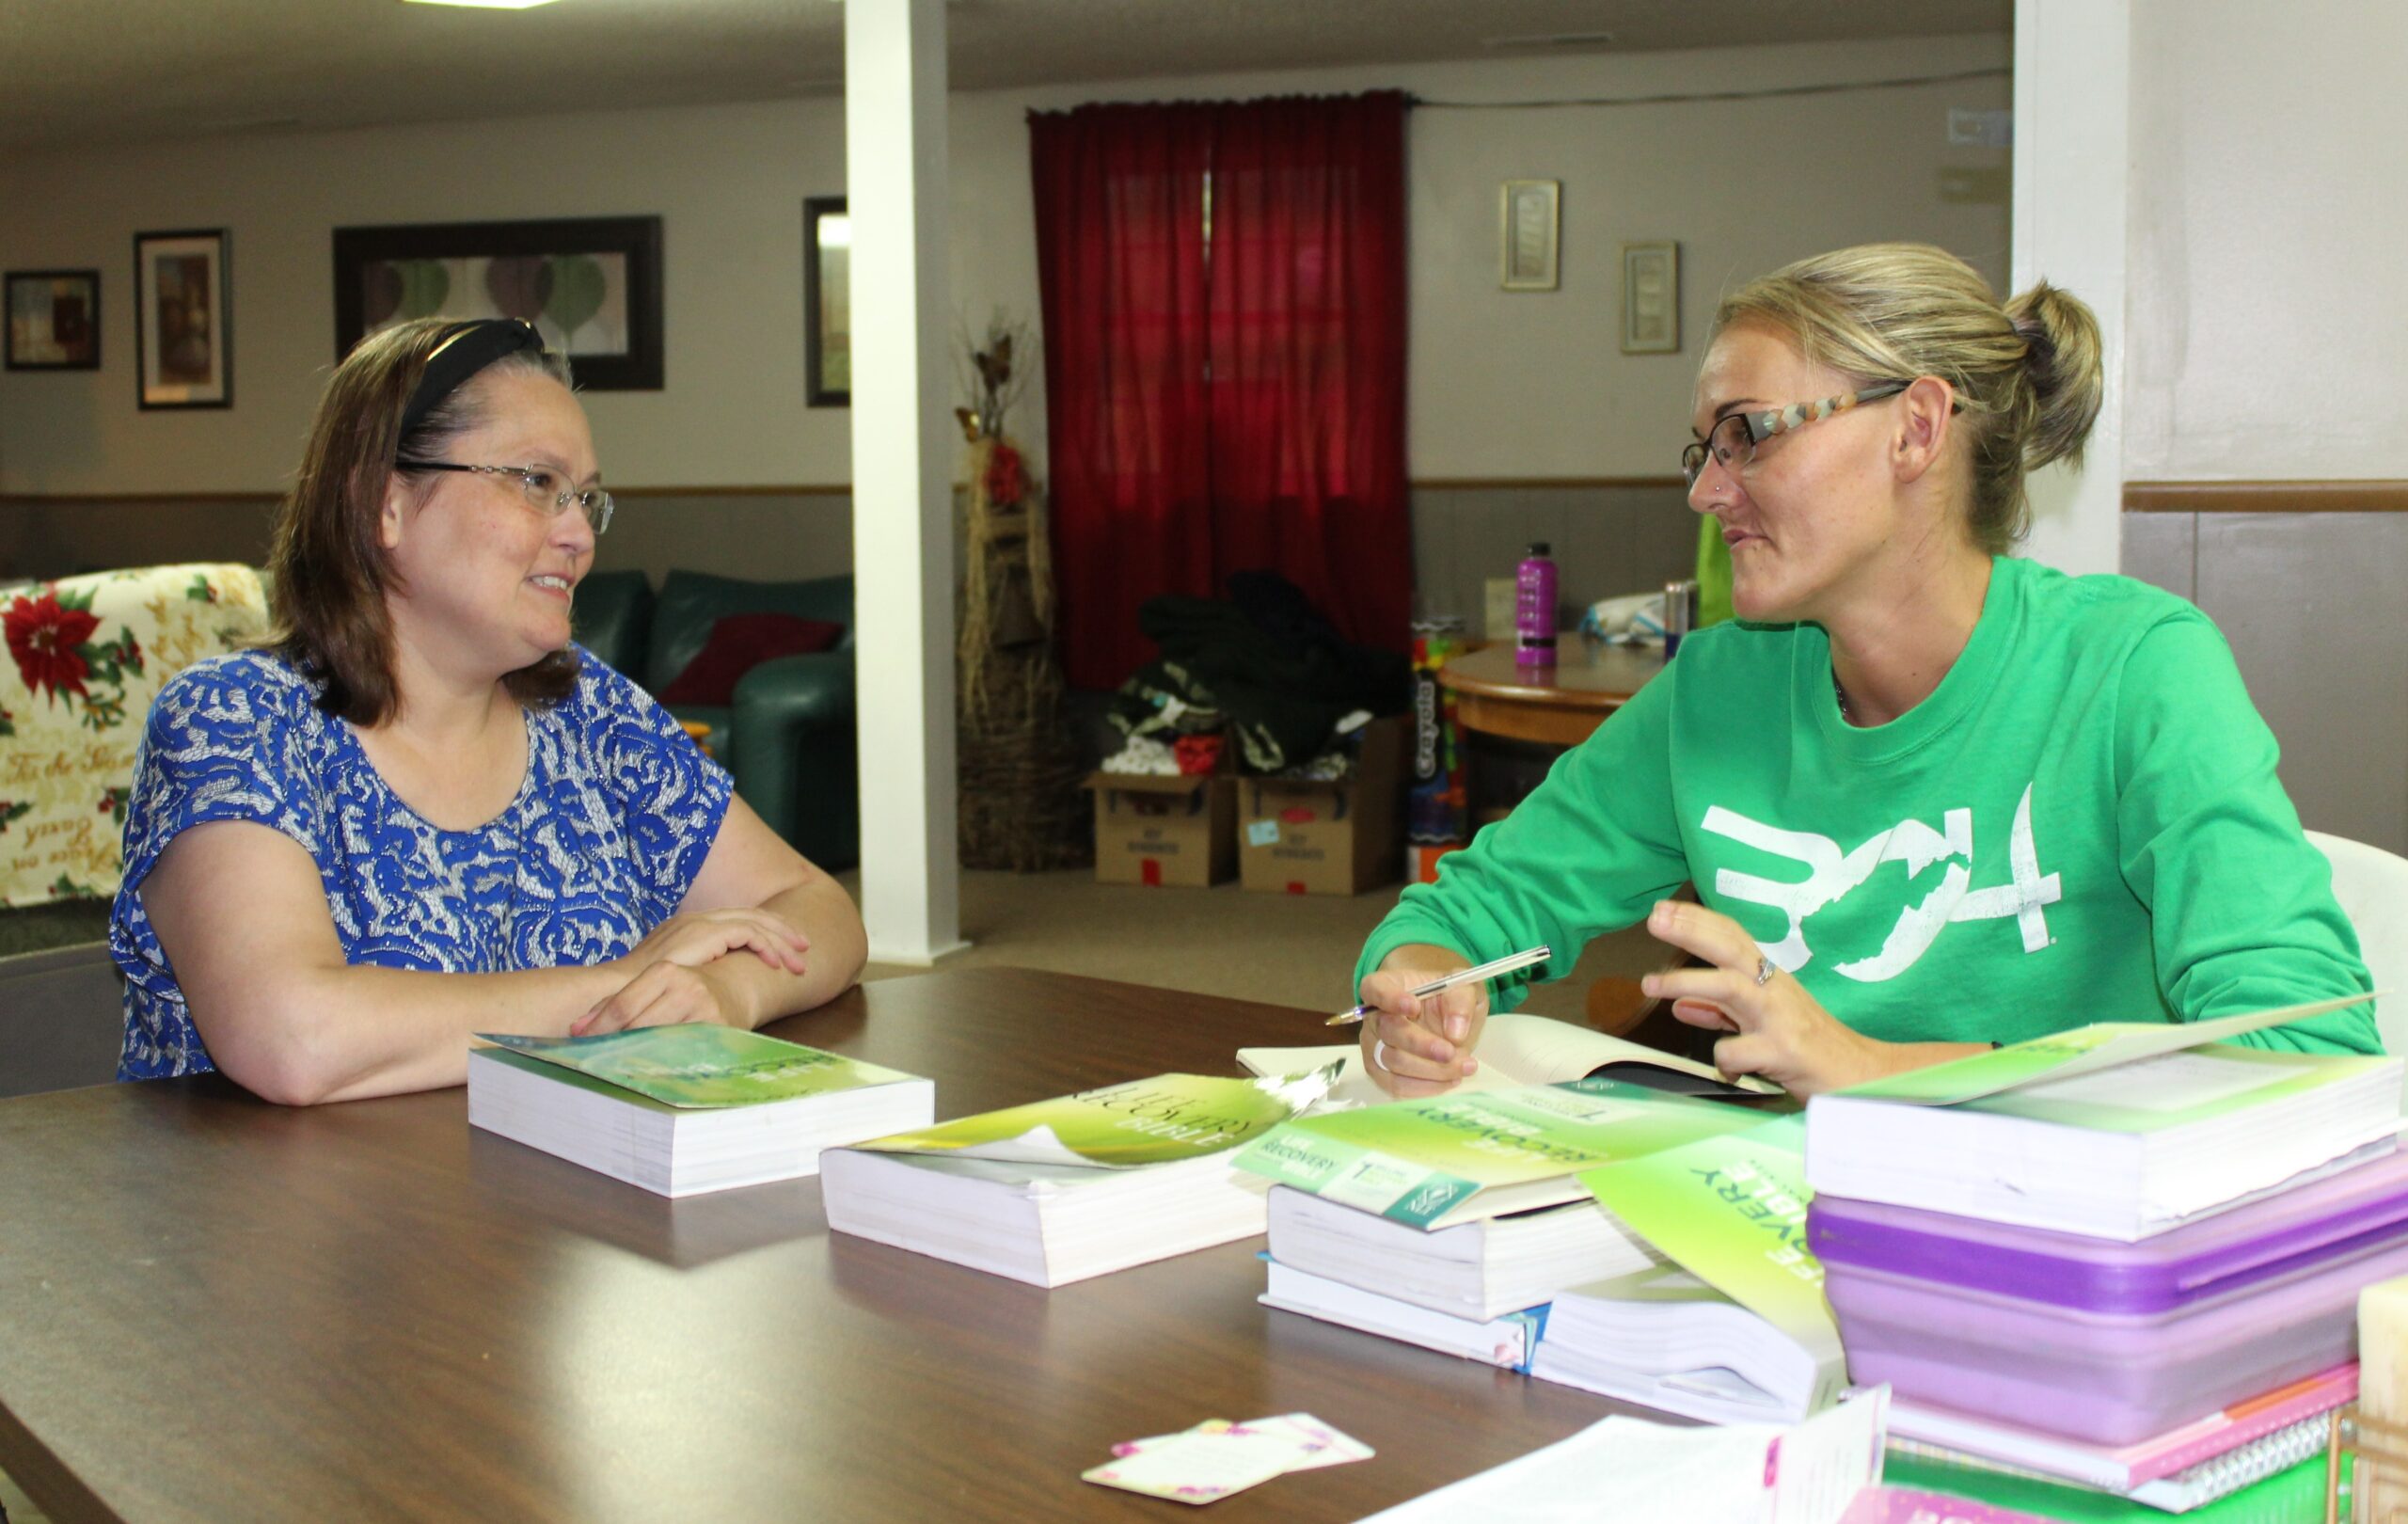 Adult Education Instructor (left), and Jamie Williams, CCWVa adult learner (right), discuss Jamie’s educational goals.